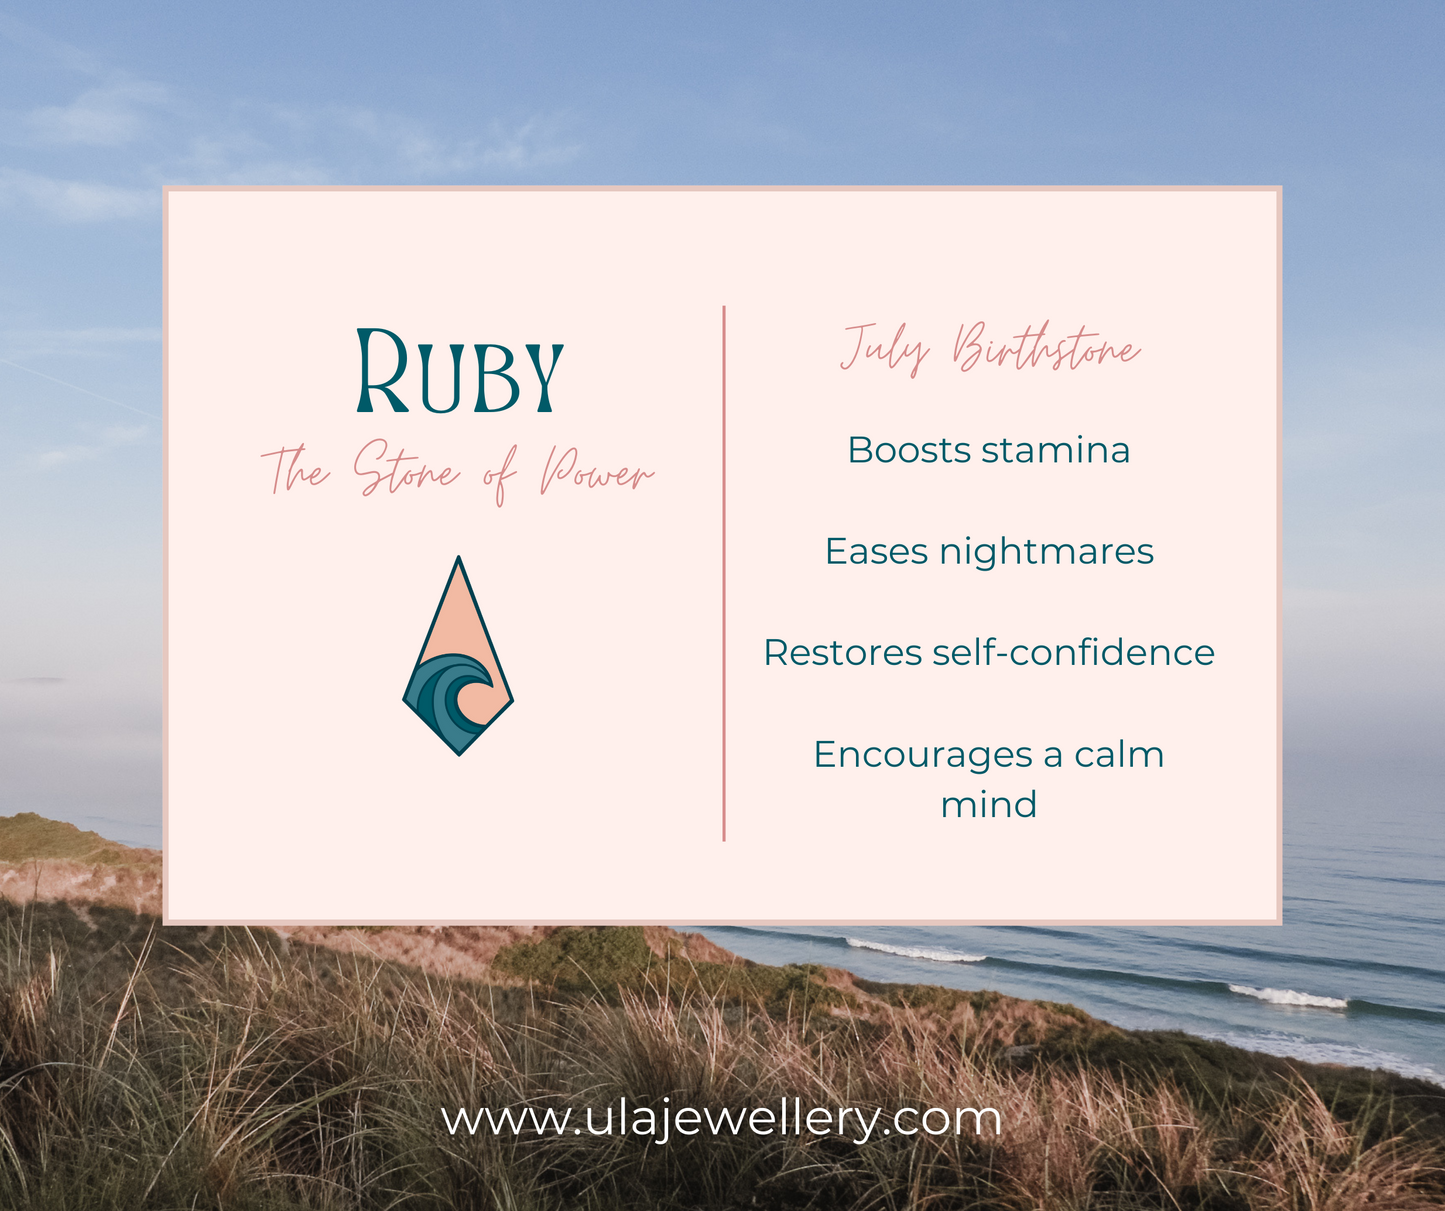 infographic for ruby gemstone by Ula Jewellery Cornwall, with healing properties